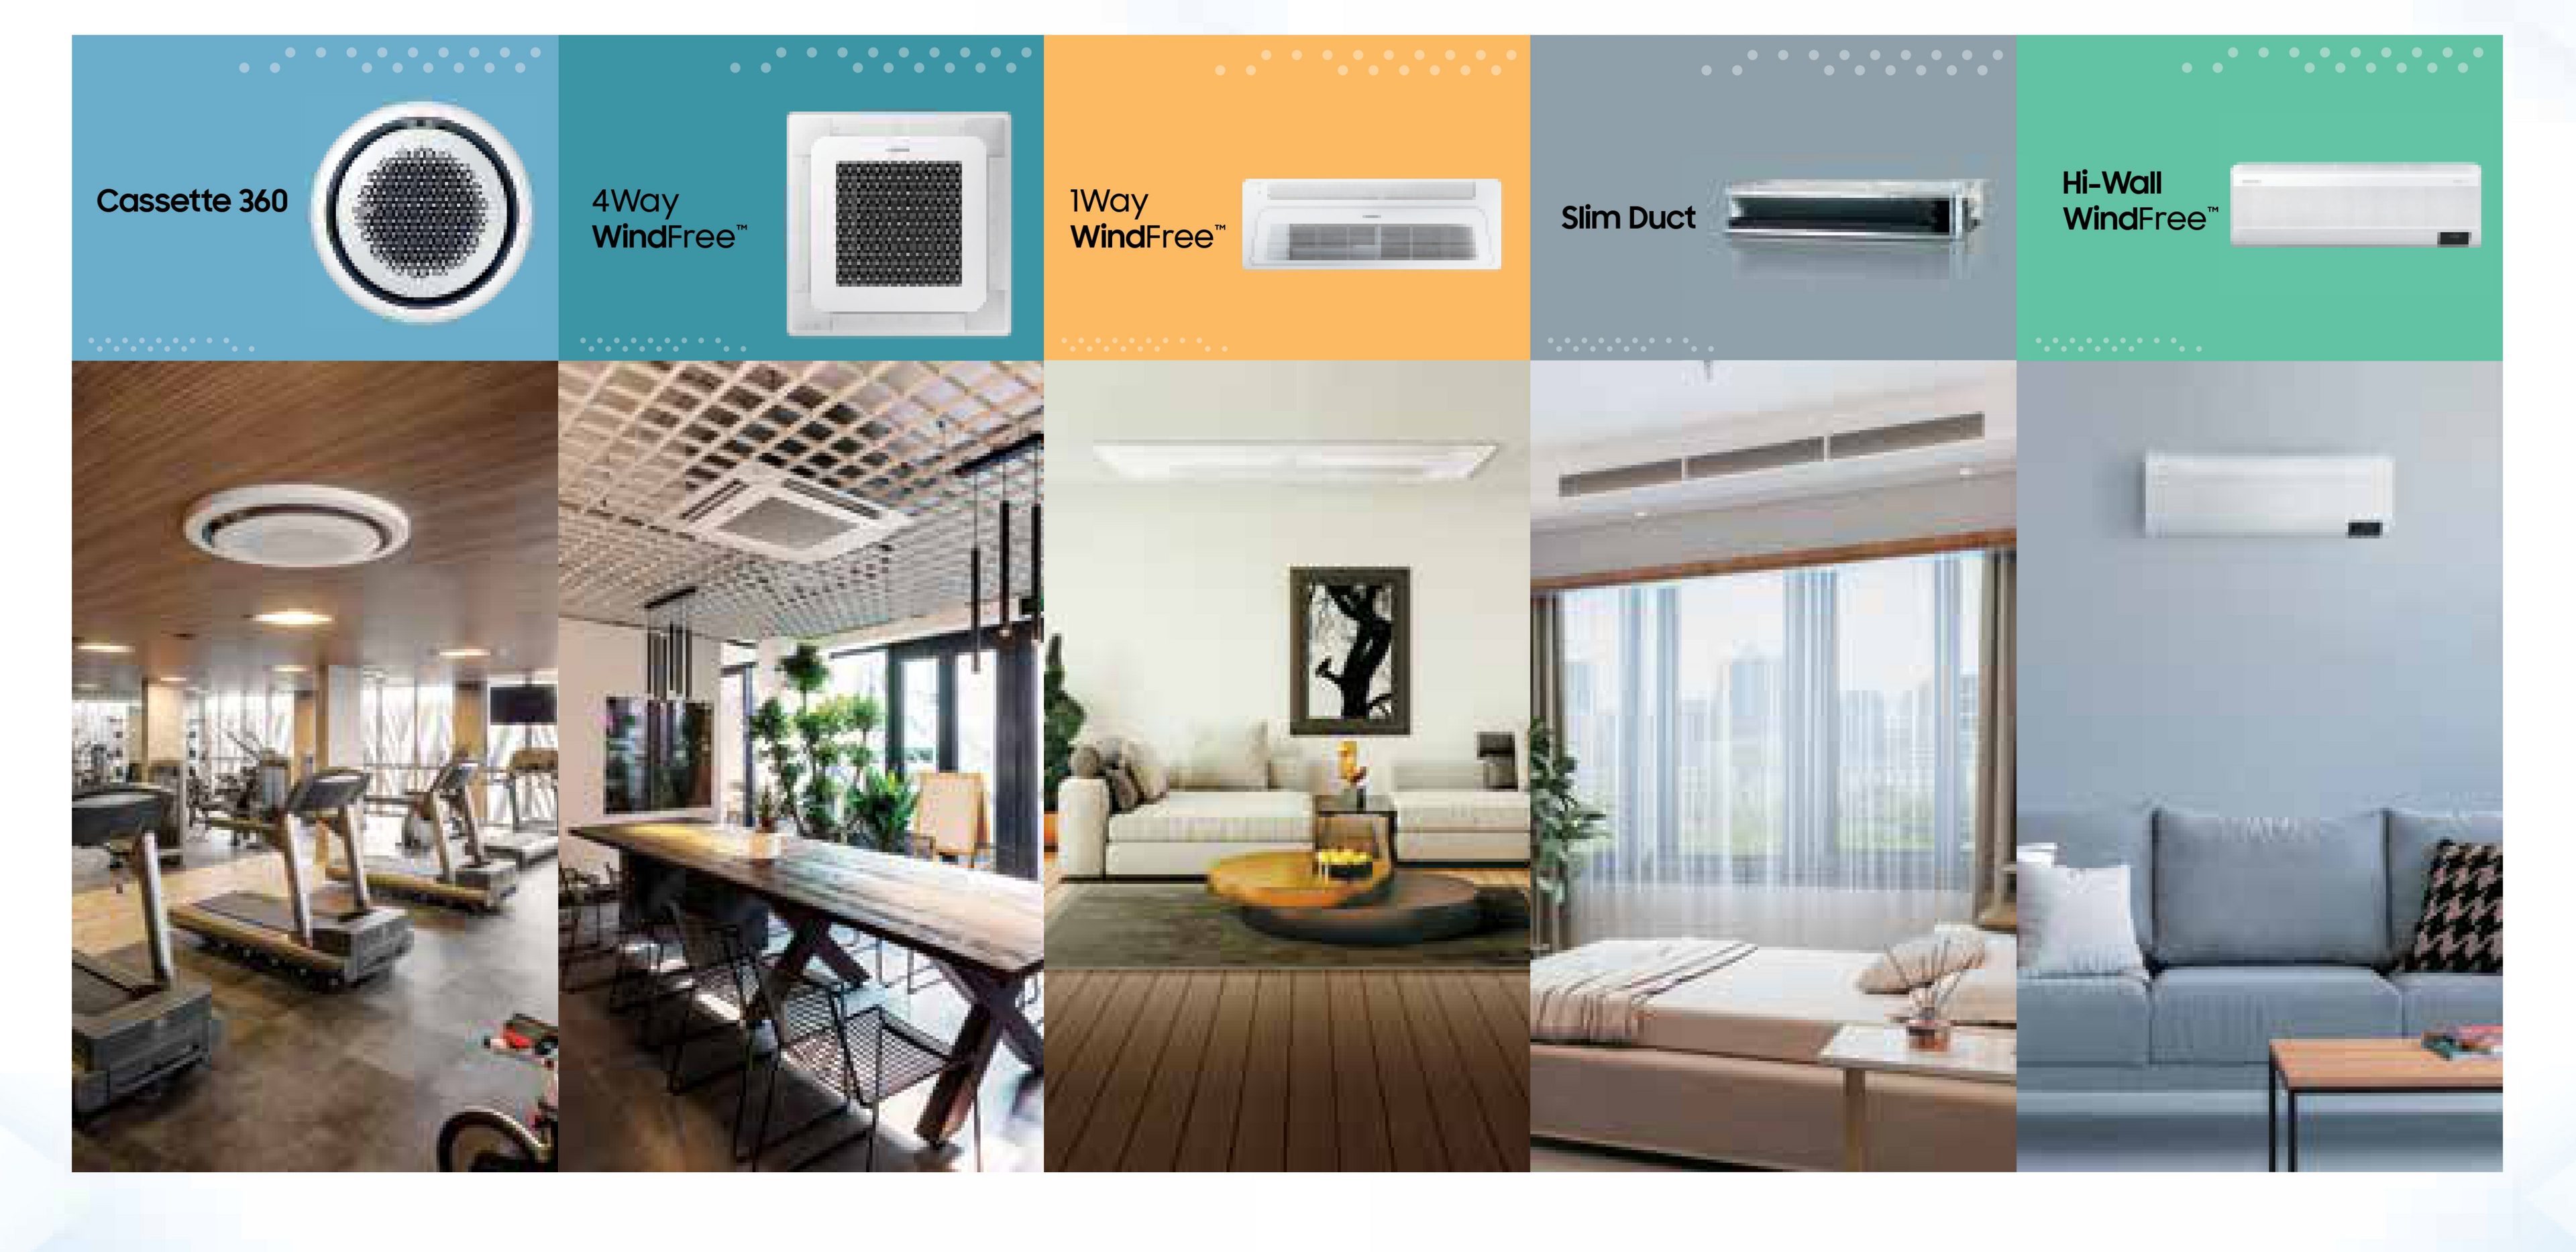 Samsung Windfree AC product Range with their uses